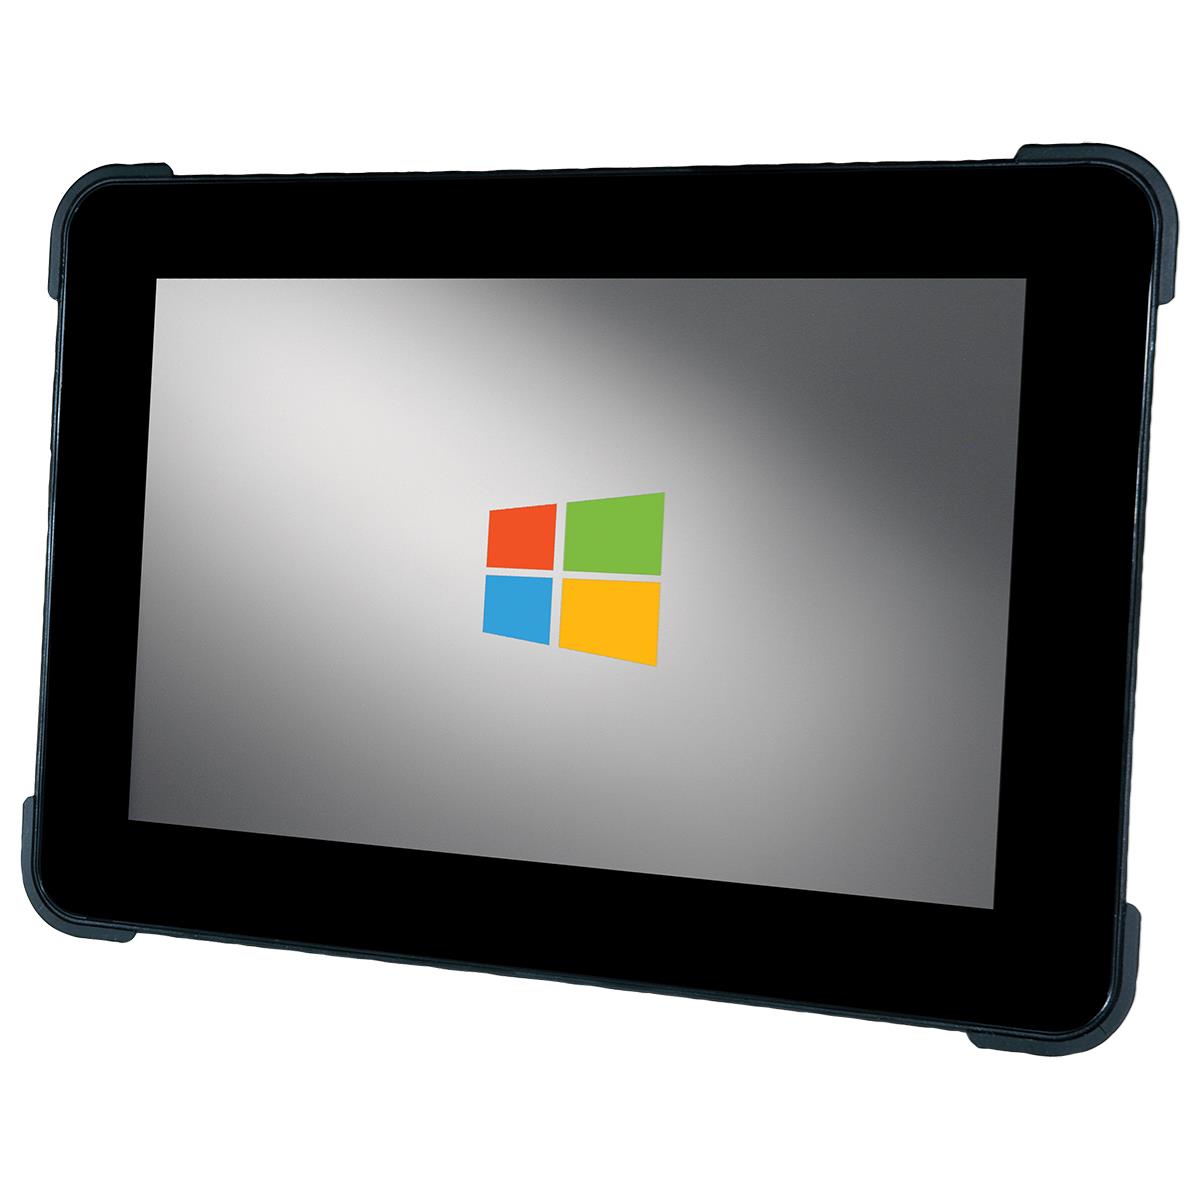 All Windows Tablets in Windows Tablets 